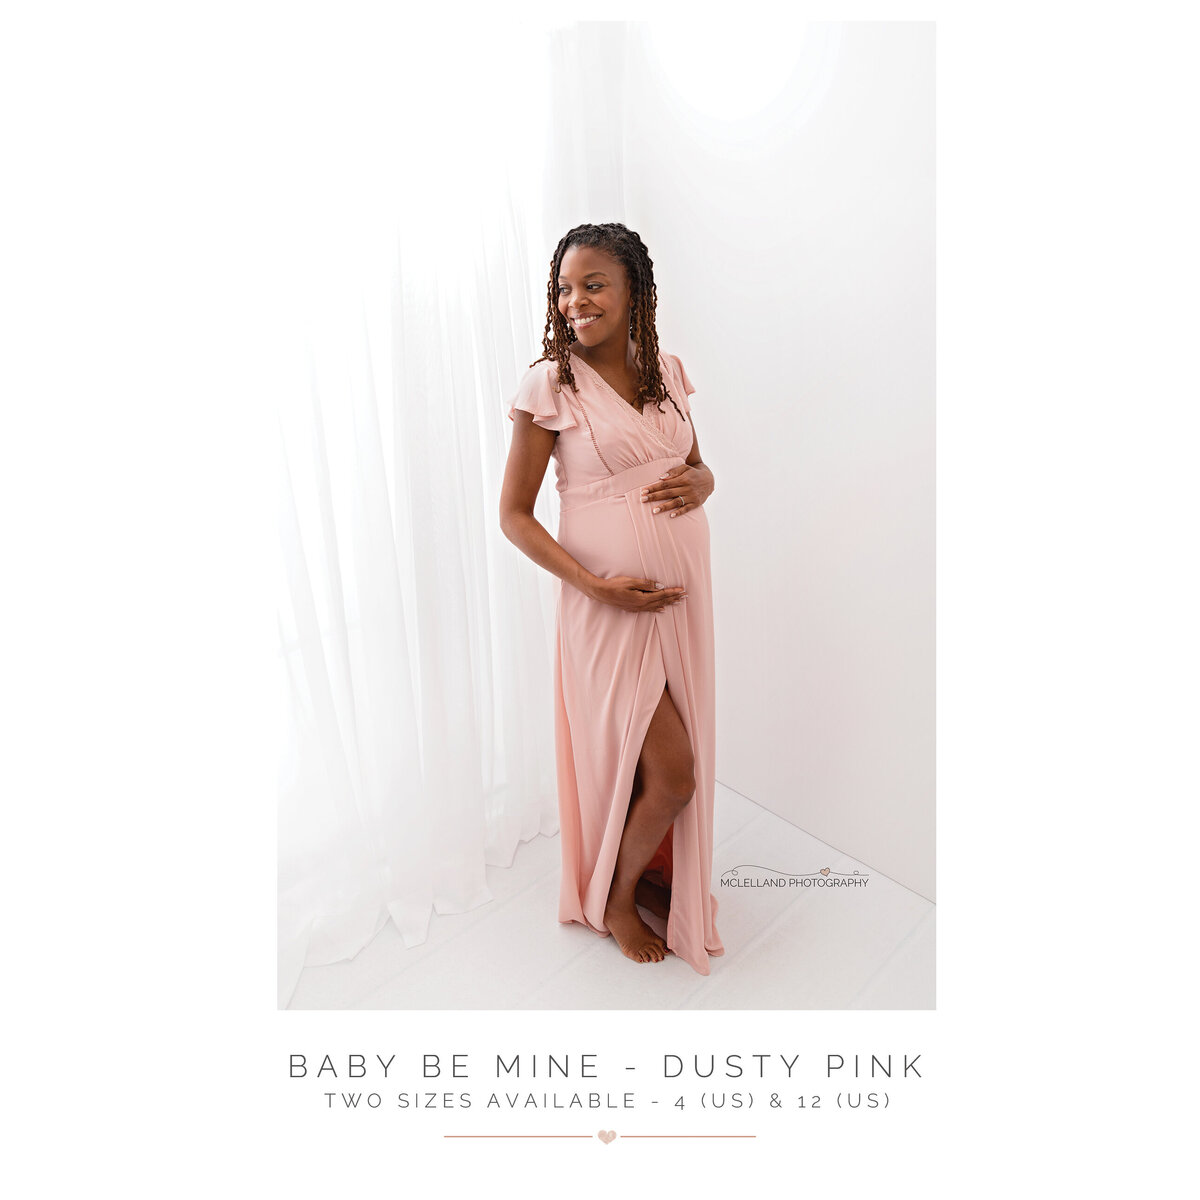 Baby Be Mine - Dusty Pink